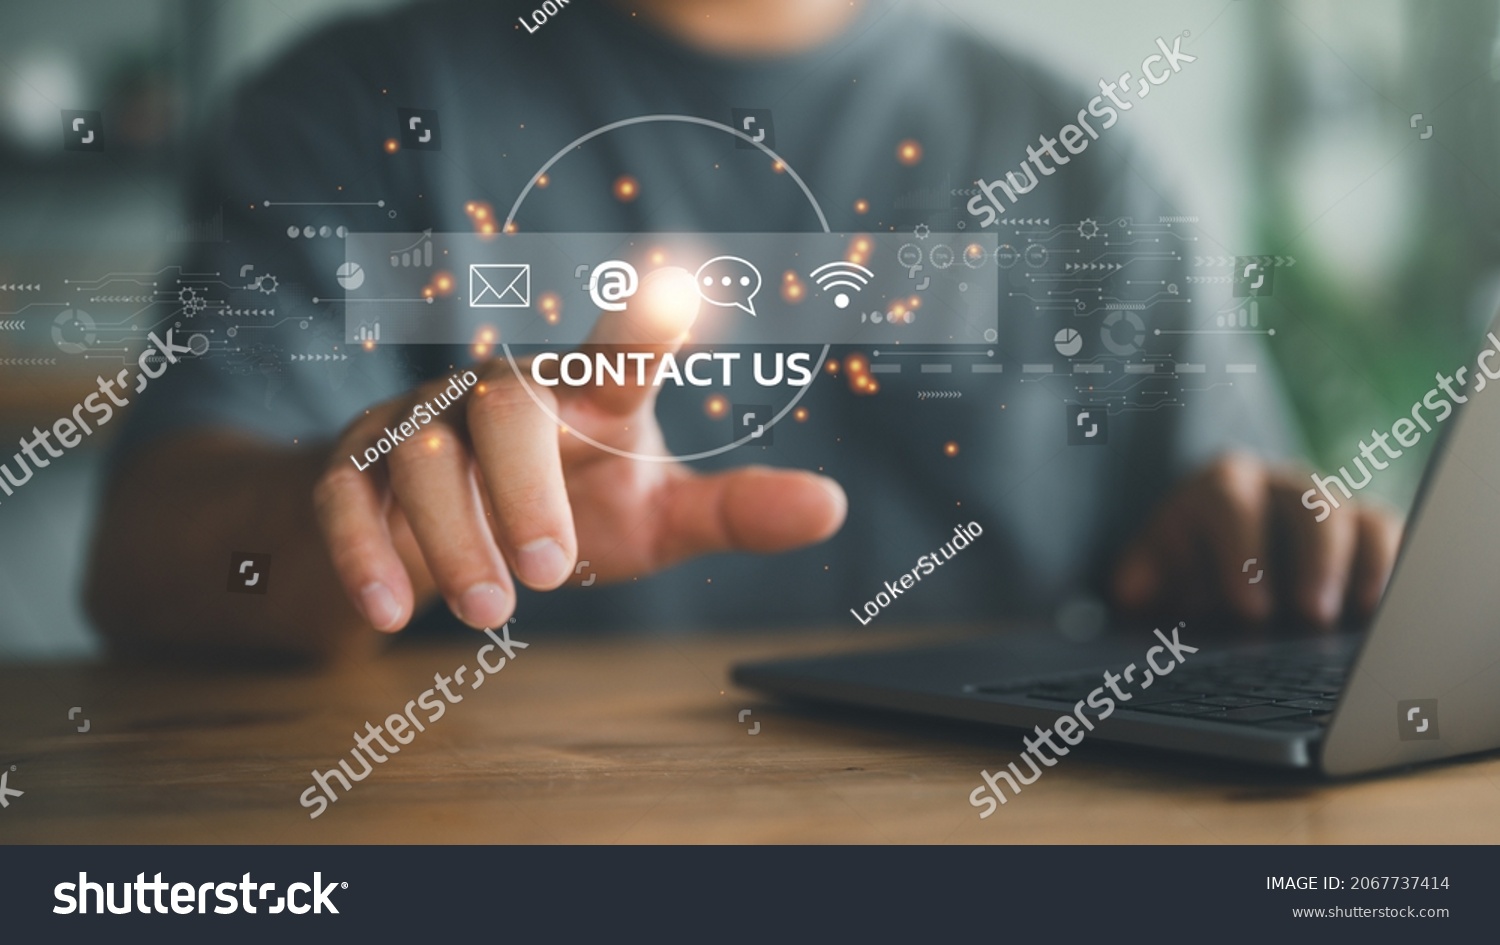 Contact us or Customer support hotline people connect. Businessman using a laptop and touching on virtual screen contact icons ( email, address, live chat, internet wifi ). #2067737414